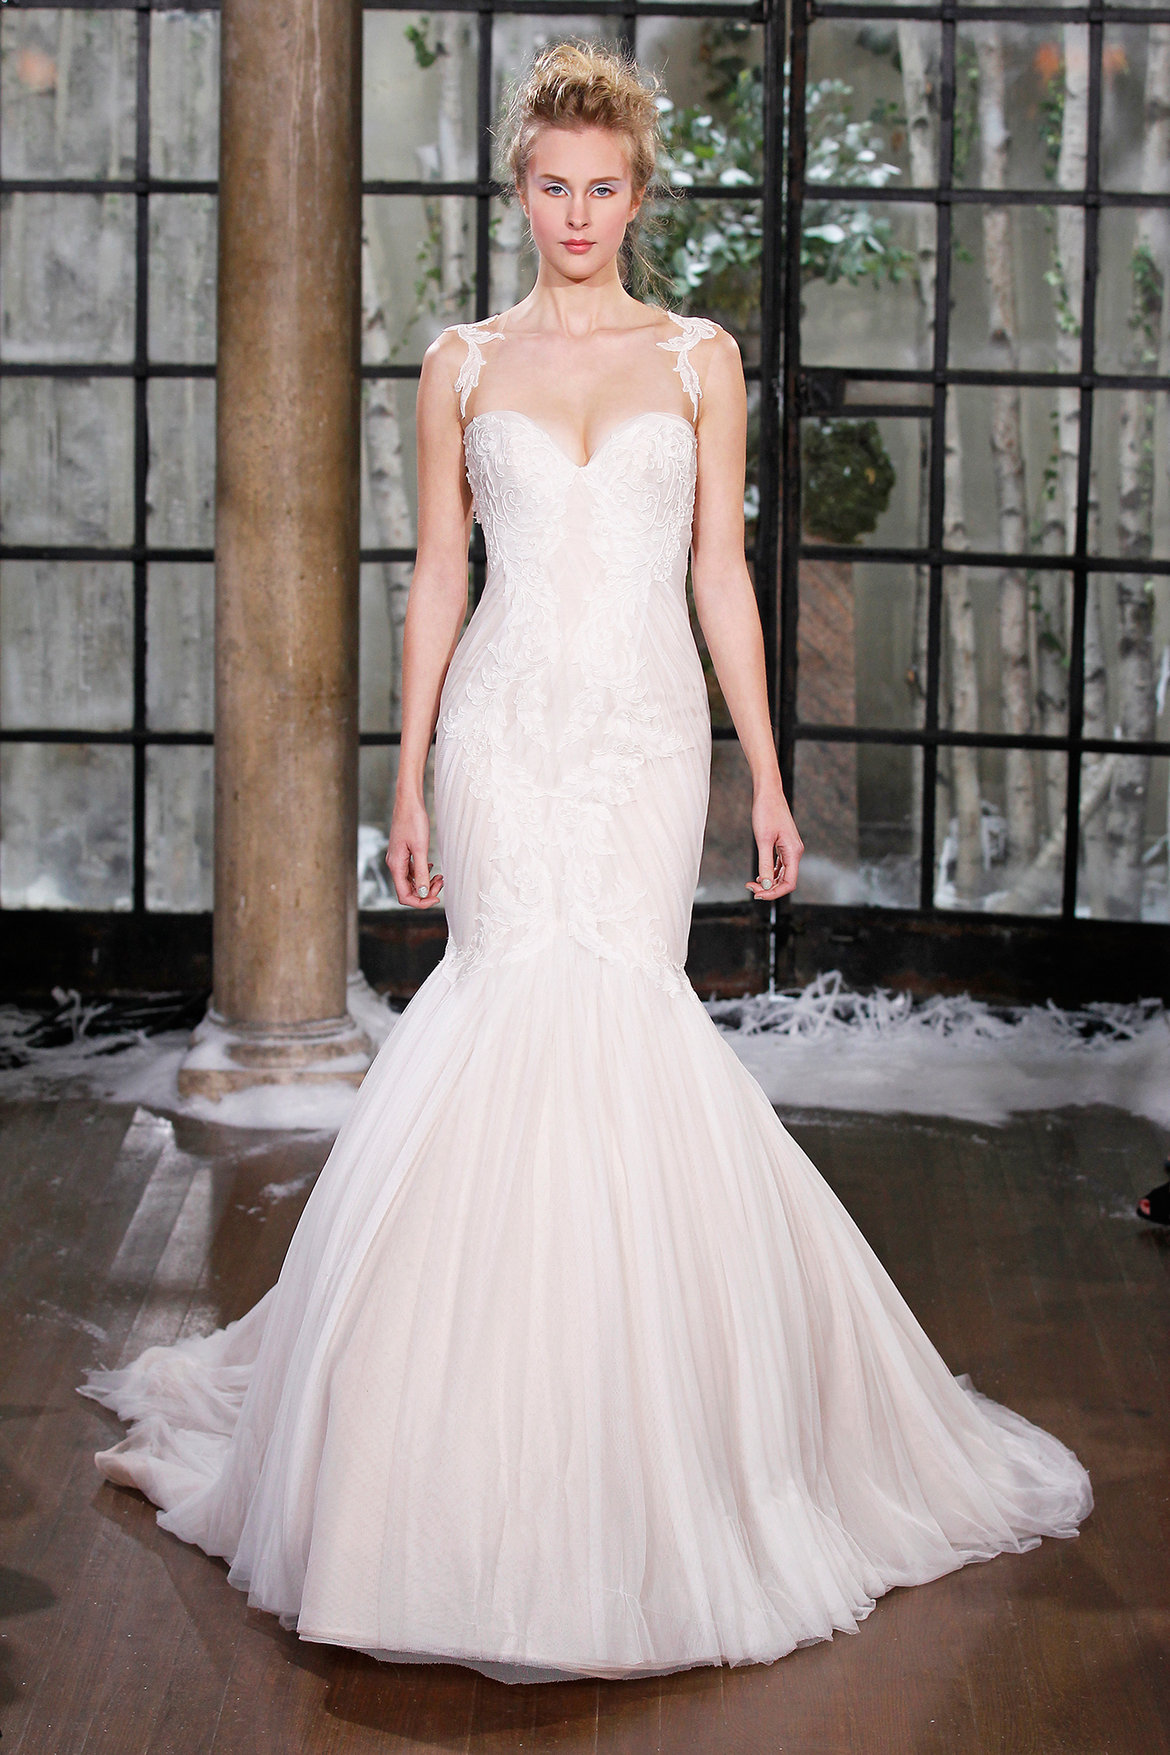 The 25 Most Popular Wedding Gowns of 2015 | BridalGuide